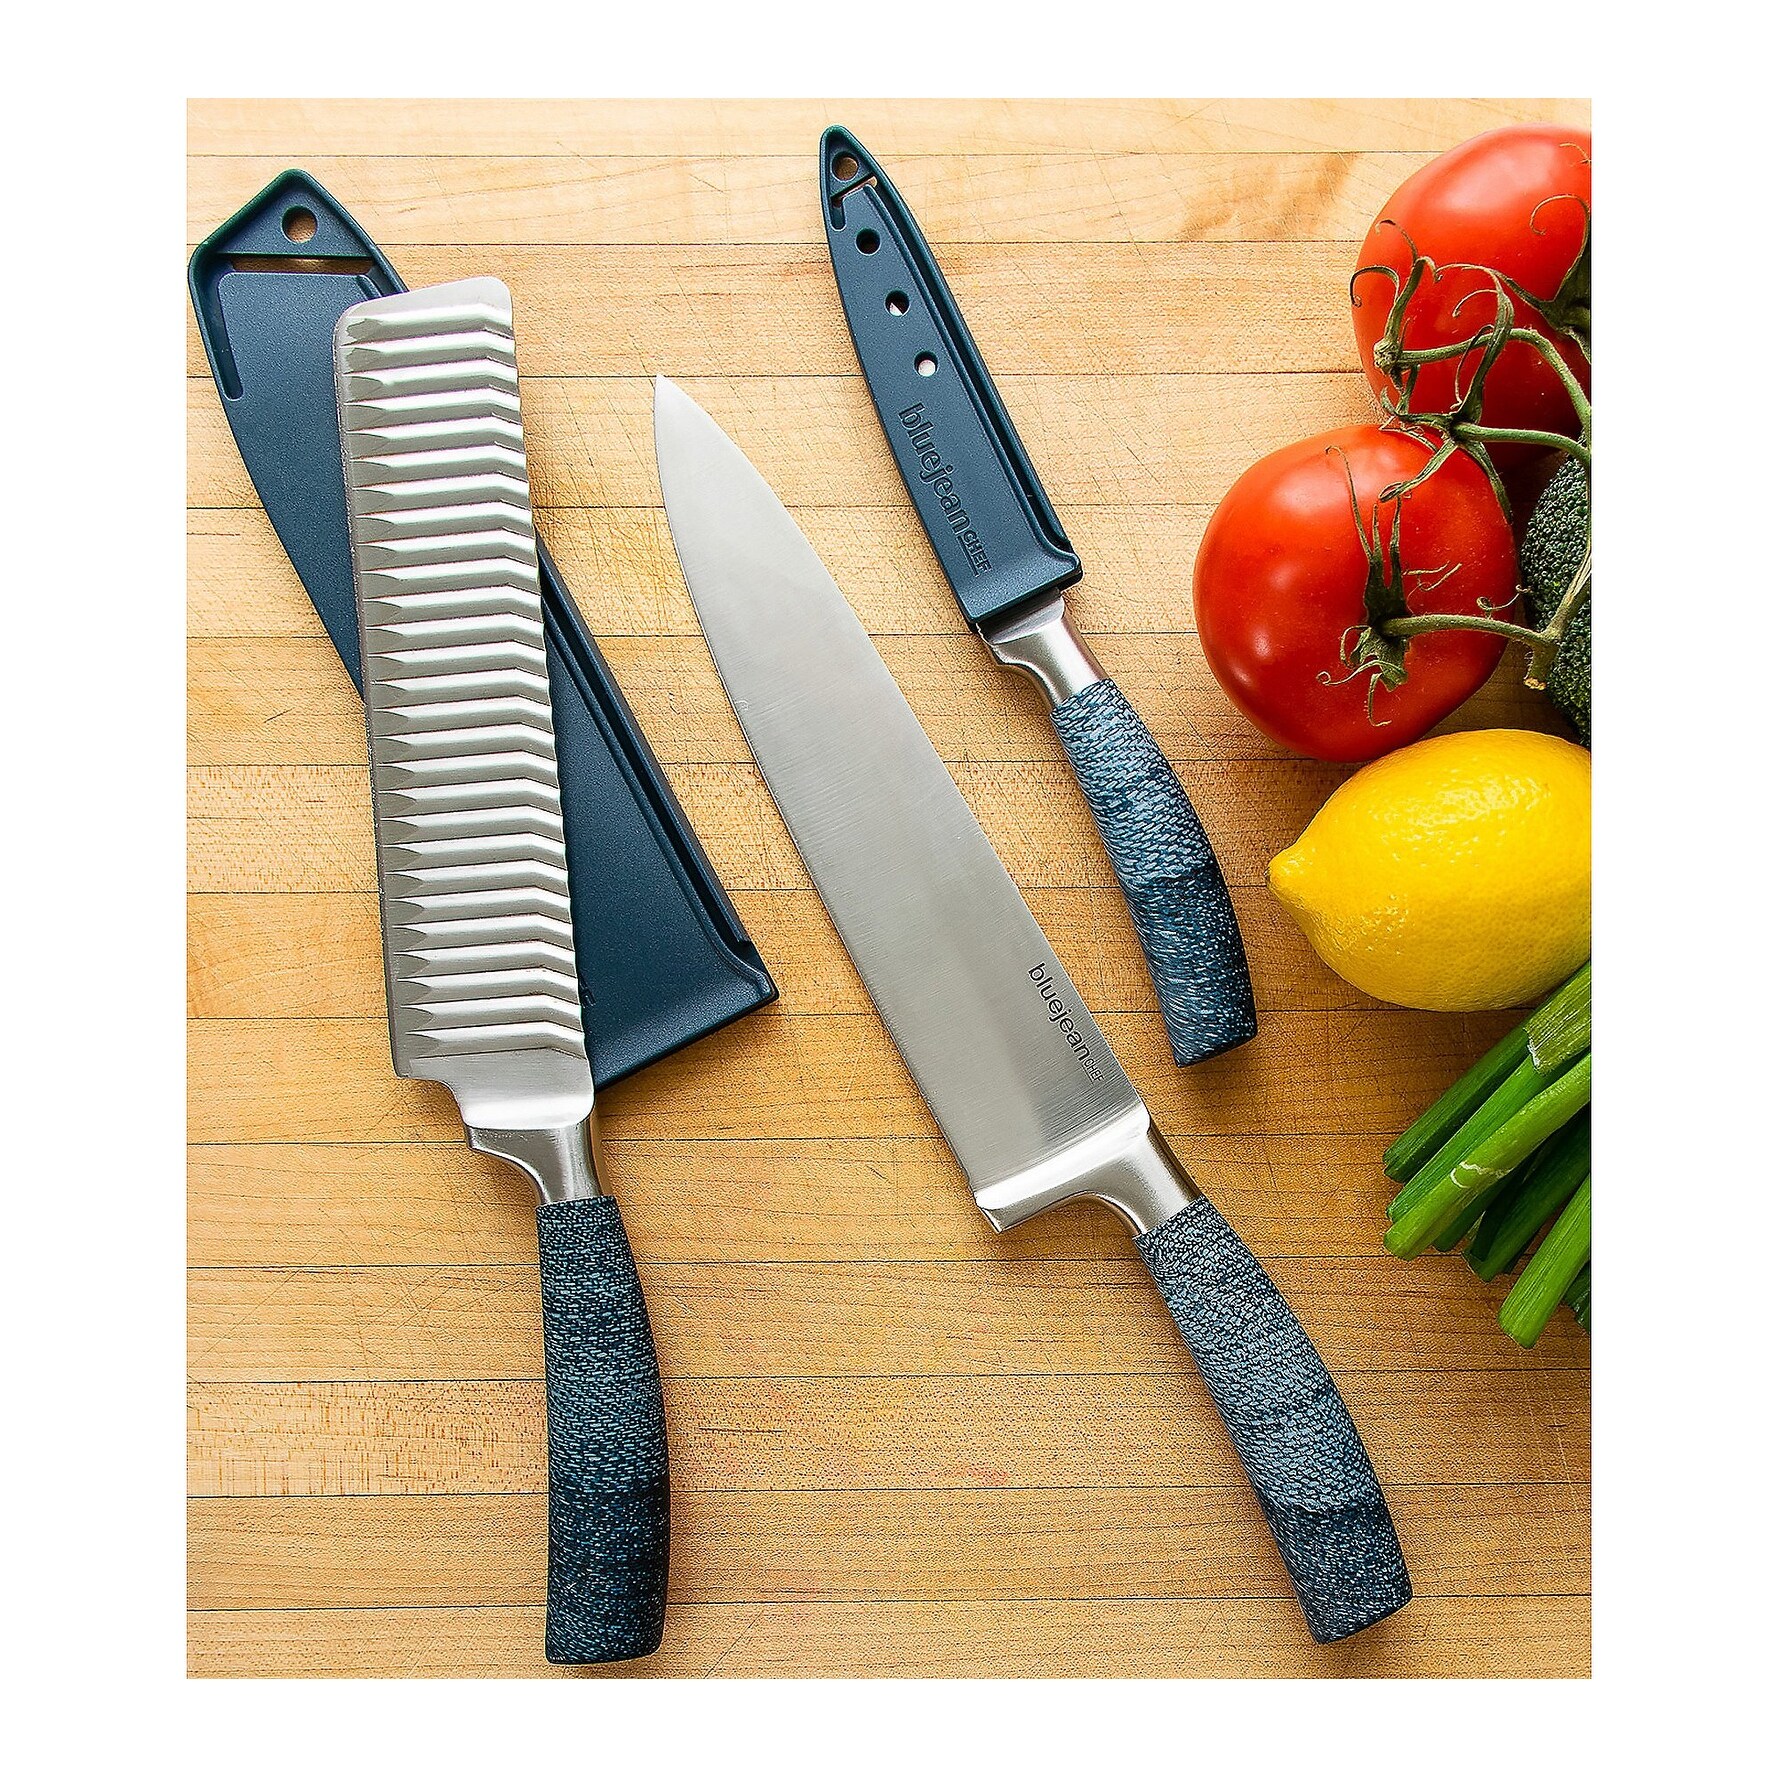 https://ak1.ostkcdn.com/images/products/is/images/direct/1672a2658c98ba527c670e7a302374bf047779cb/Blue-Jean-Chef-3-Piece-Forged-Cutlery-Set-with-Sheaths-Refurbished.jpg